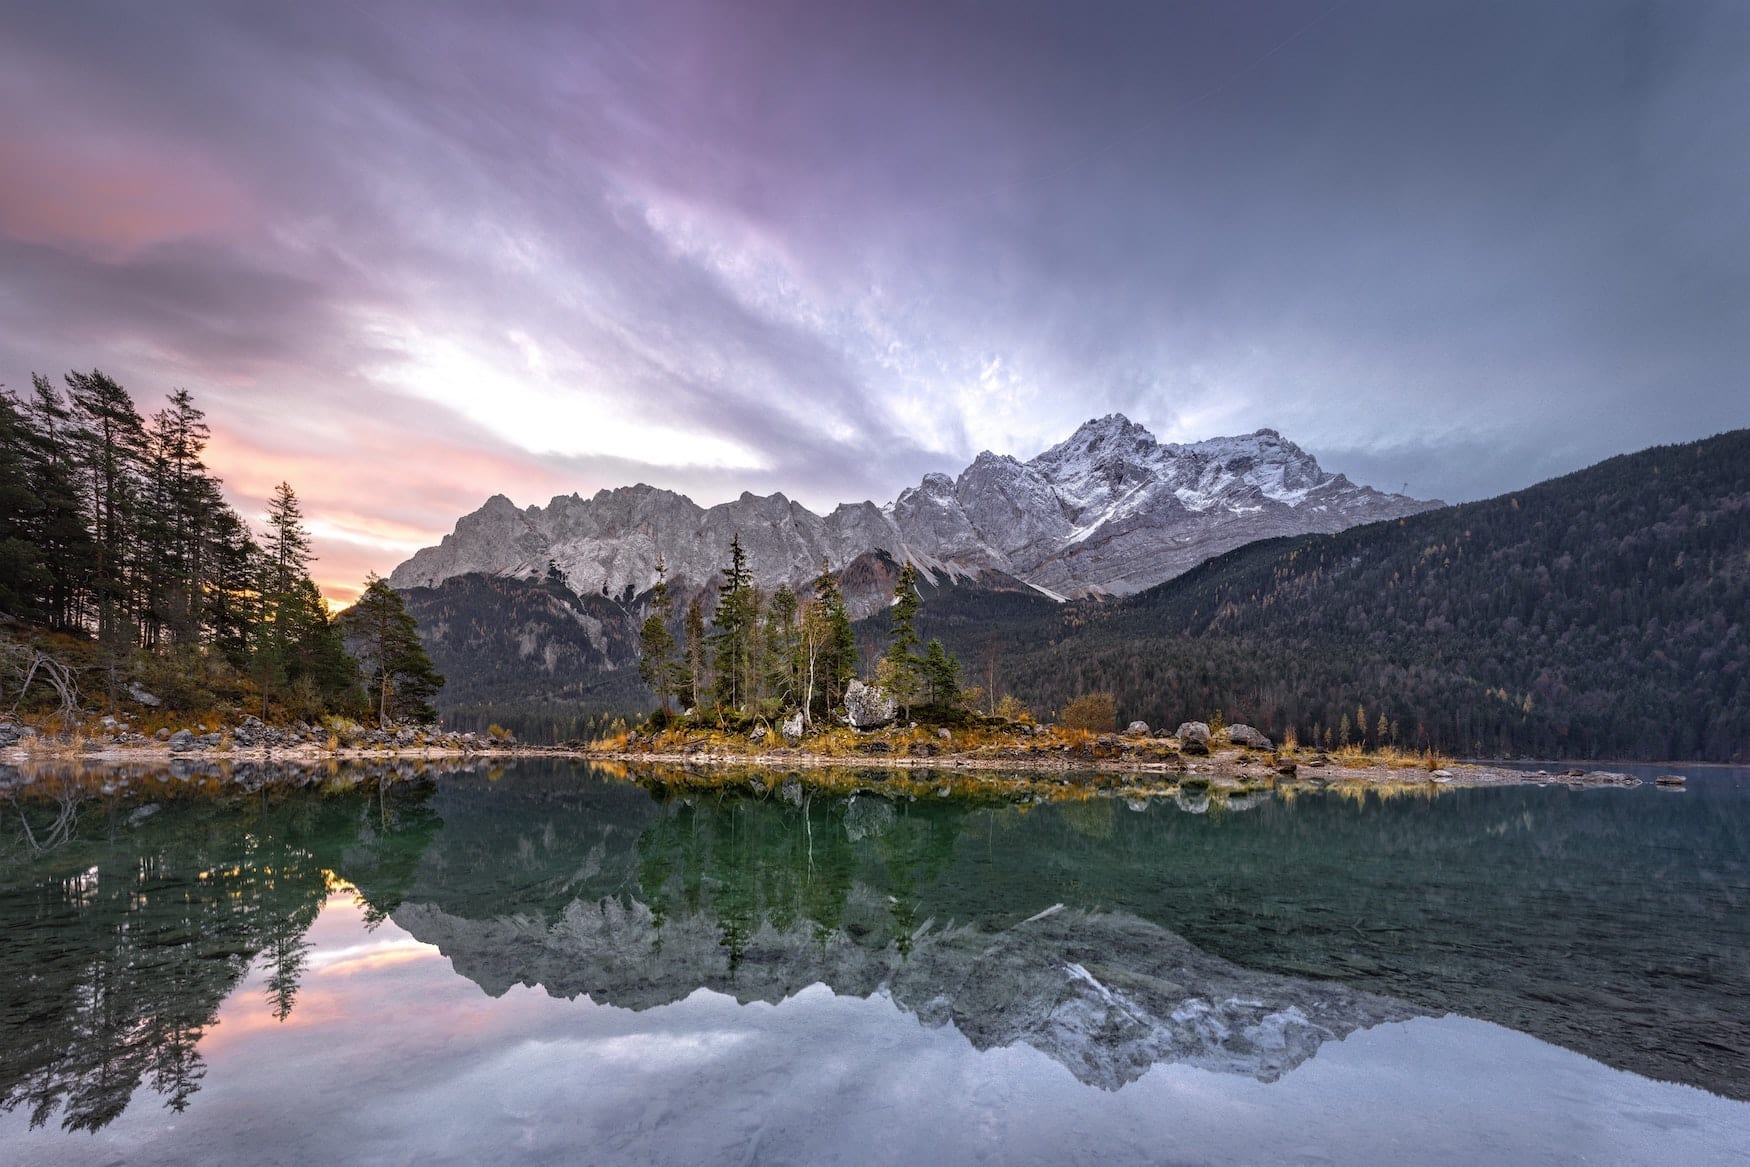 A visit to the Eibsee is one of the most spectacular adventures in Germany